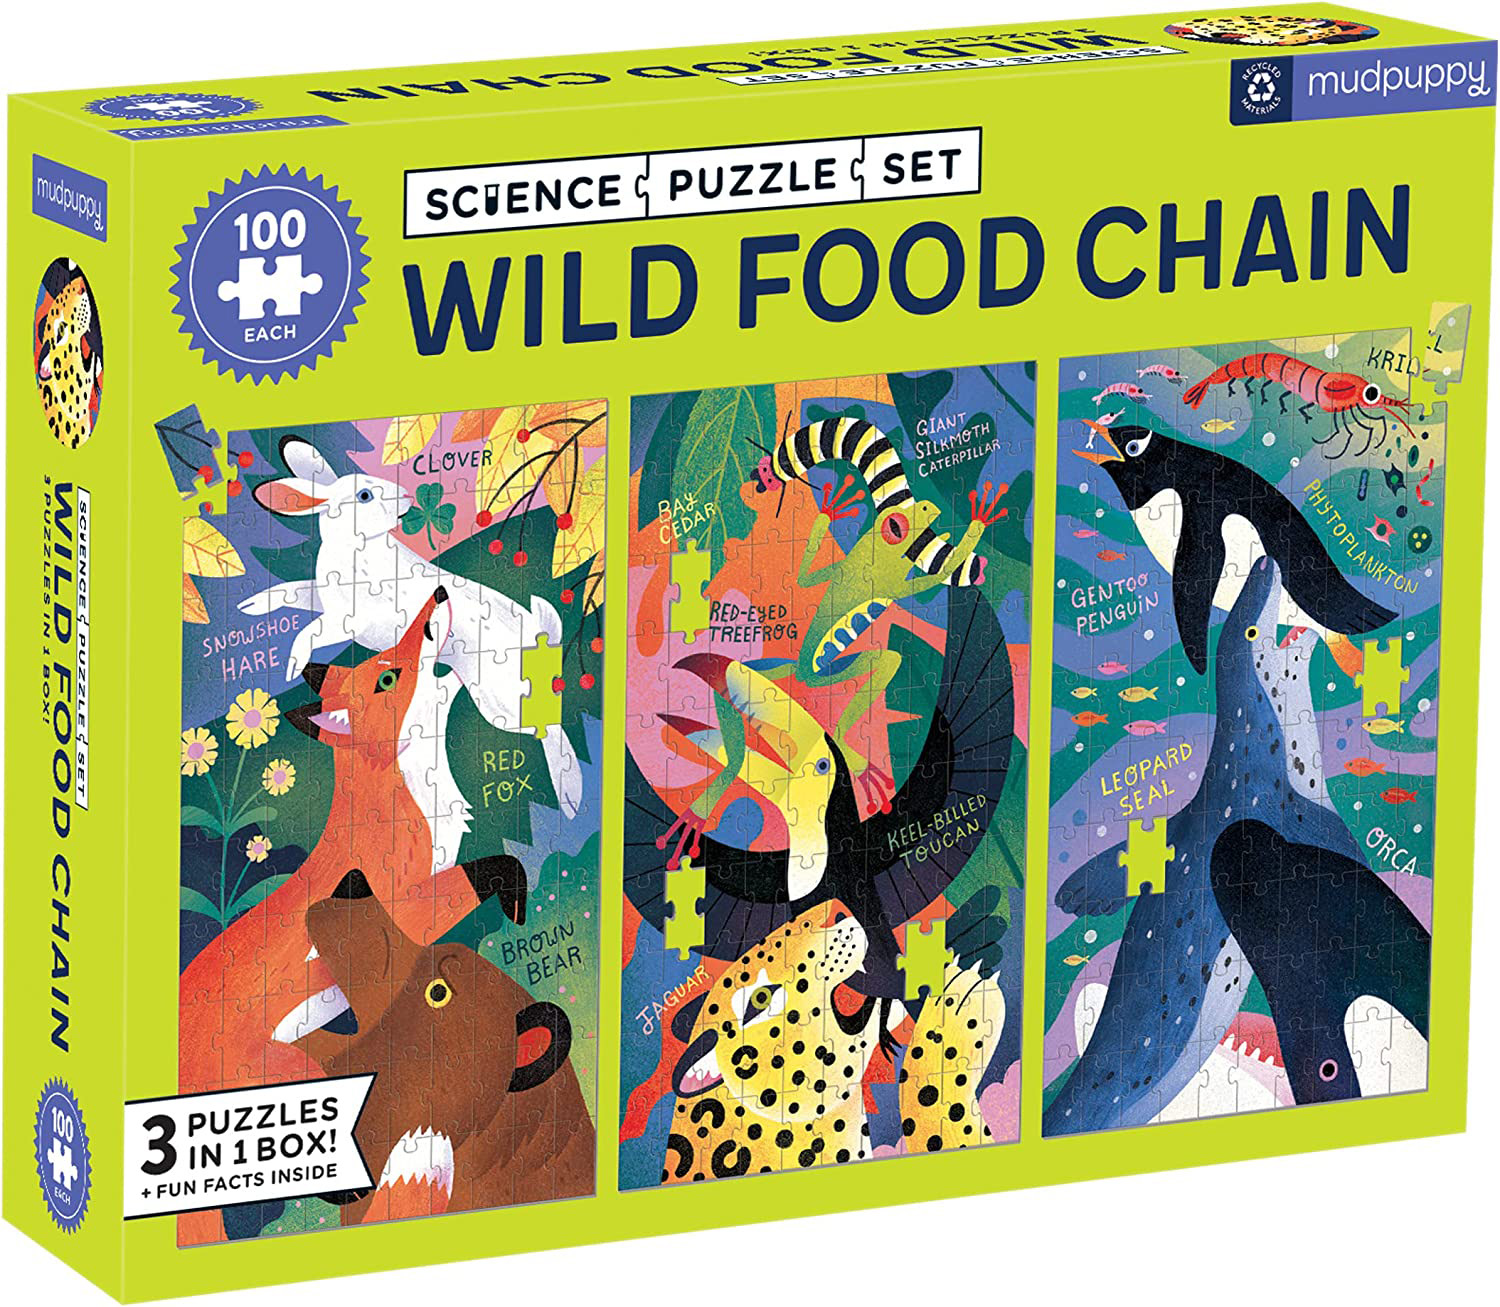 Wild Food Chain Science Multipack, 100 Pieces, Mudpuppy | Puzzle Warehouse